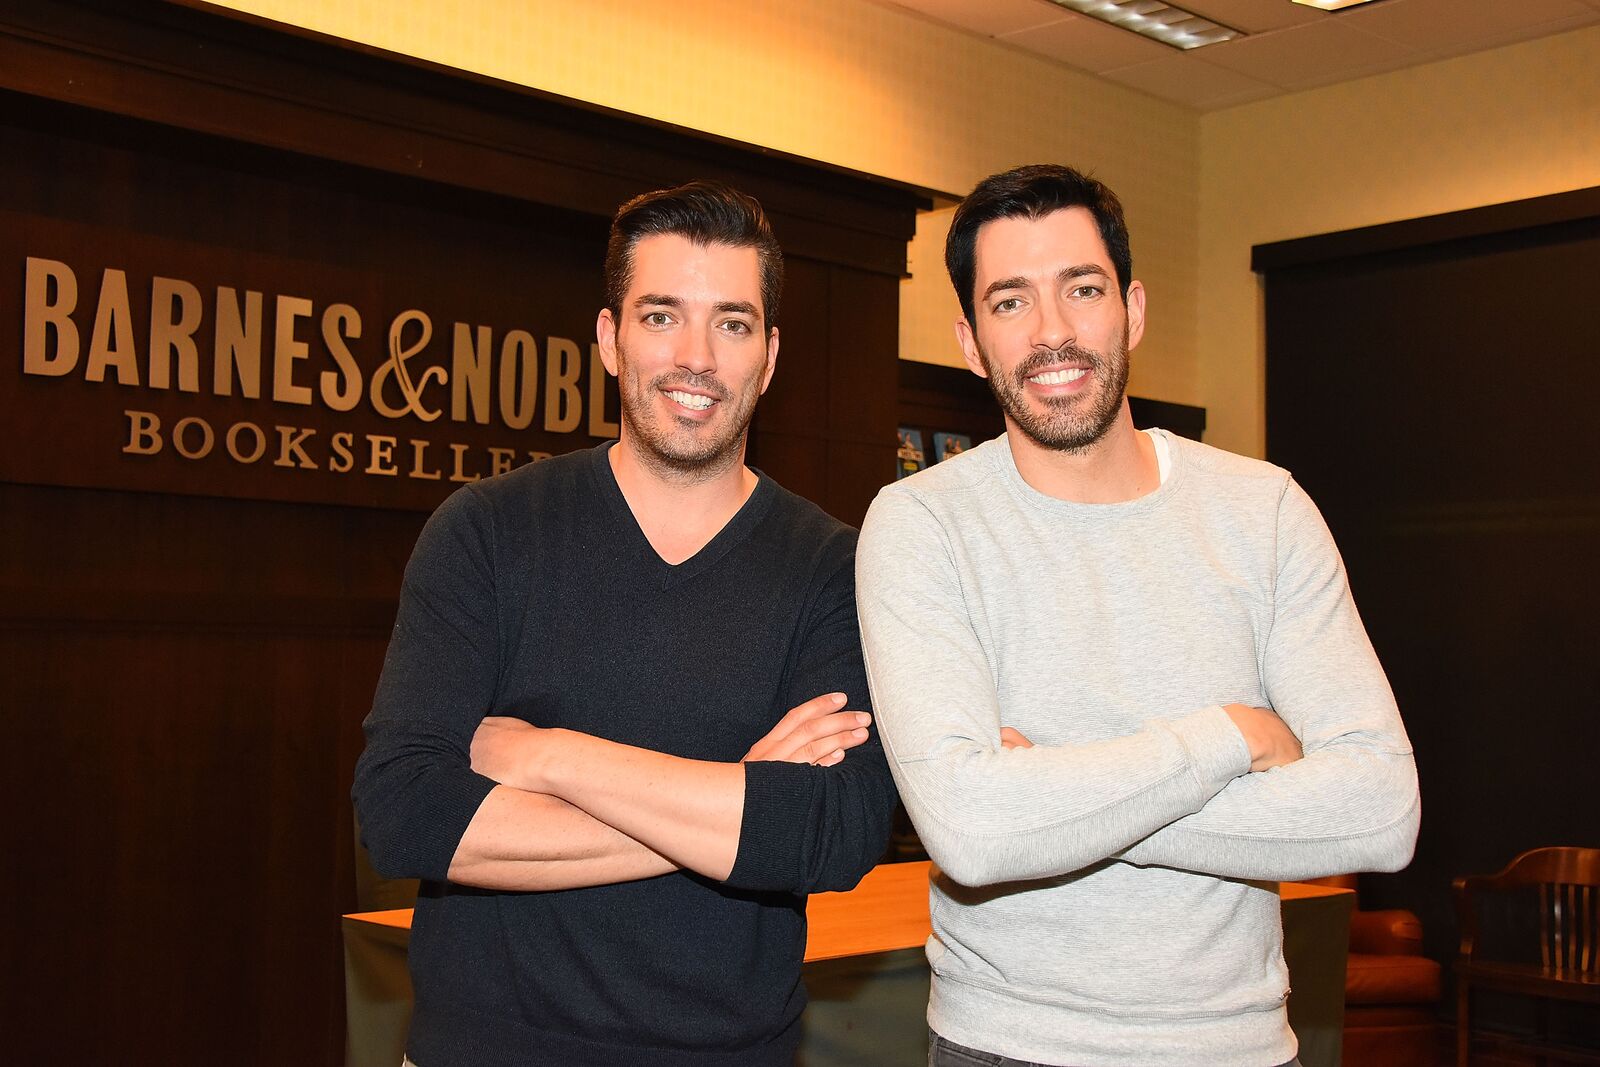 "Property Brothers" Jonathan Scott and Drew Scott Book signing for "It Takes Two: Our Story" at Barnes & Noble at The Grove on October 11, 2017. | Source: Getty Images